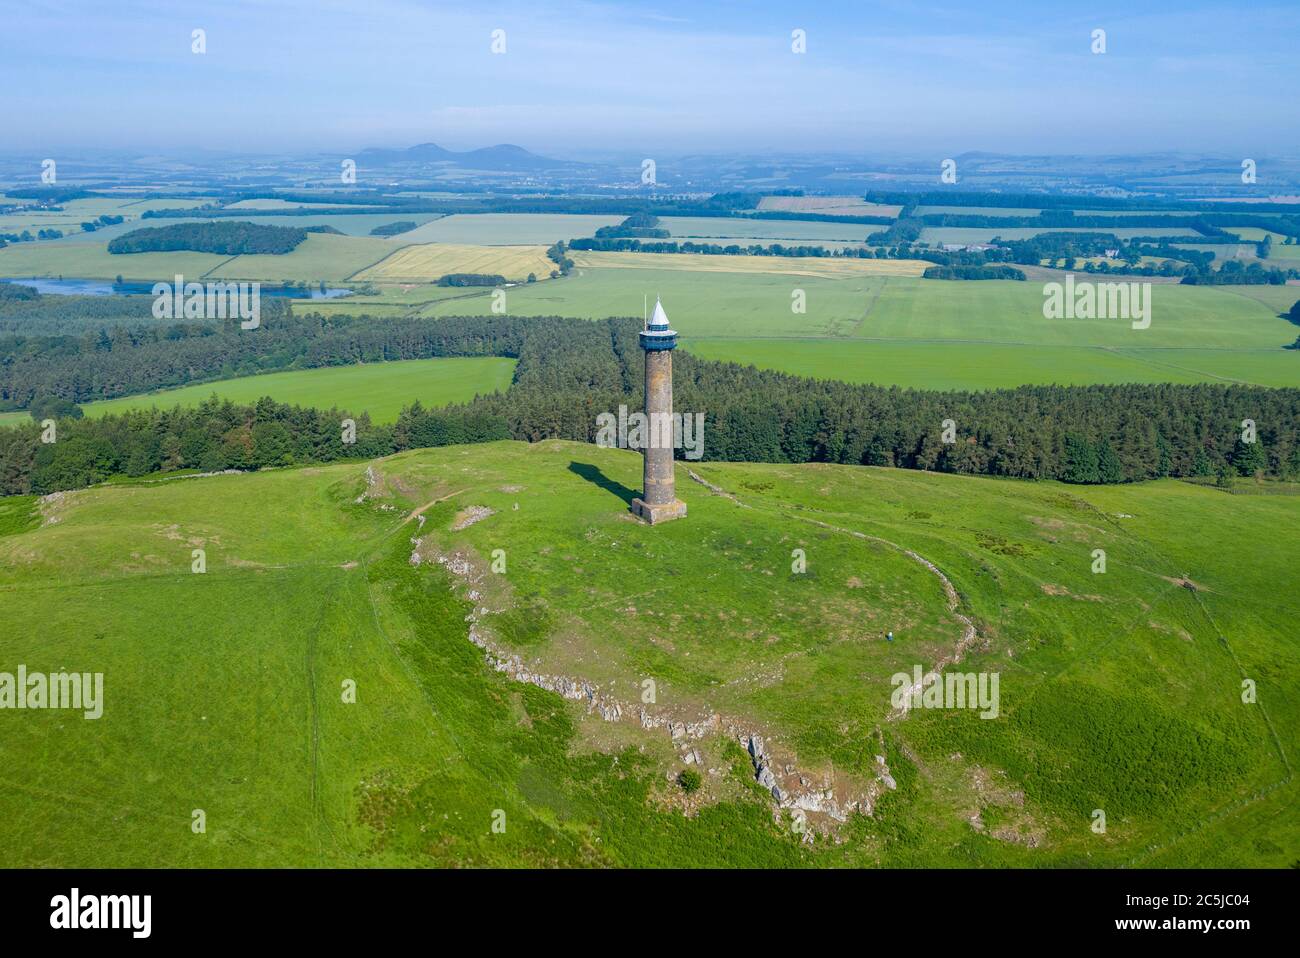 The Waterloo monument Peniel Heugh in the Scottish Borders is a 150-foot tower, built between 1817 and 1824 to commemorate the Battle of Waterloo. Stock Photo